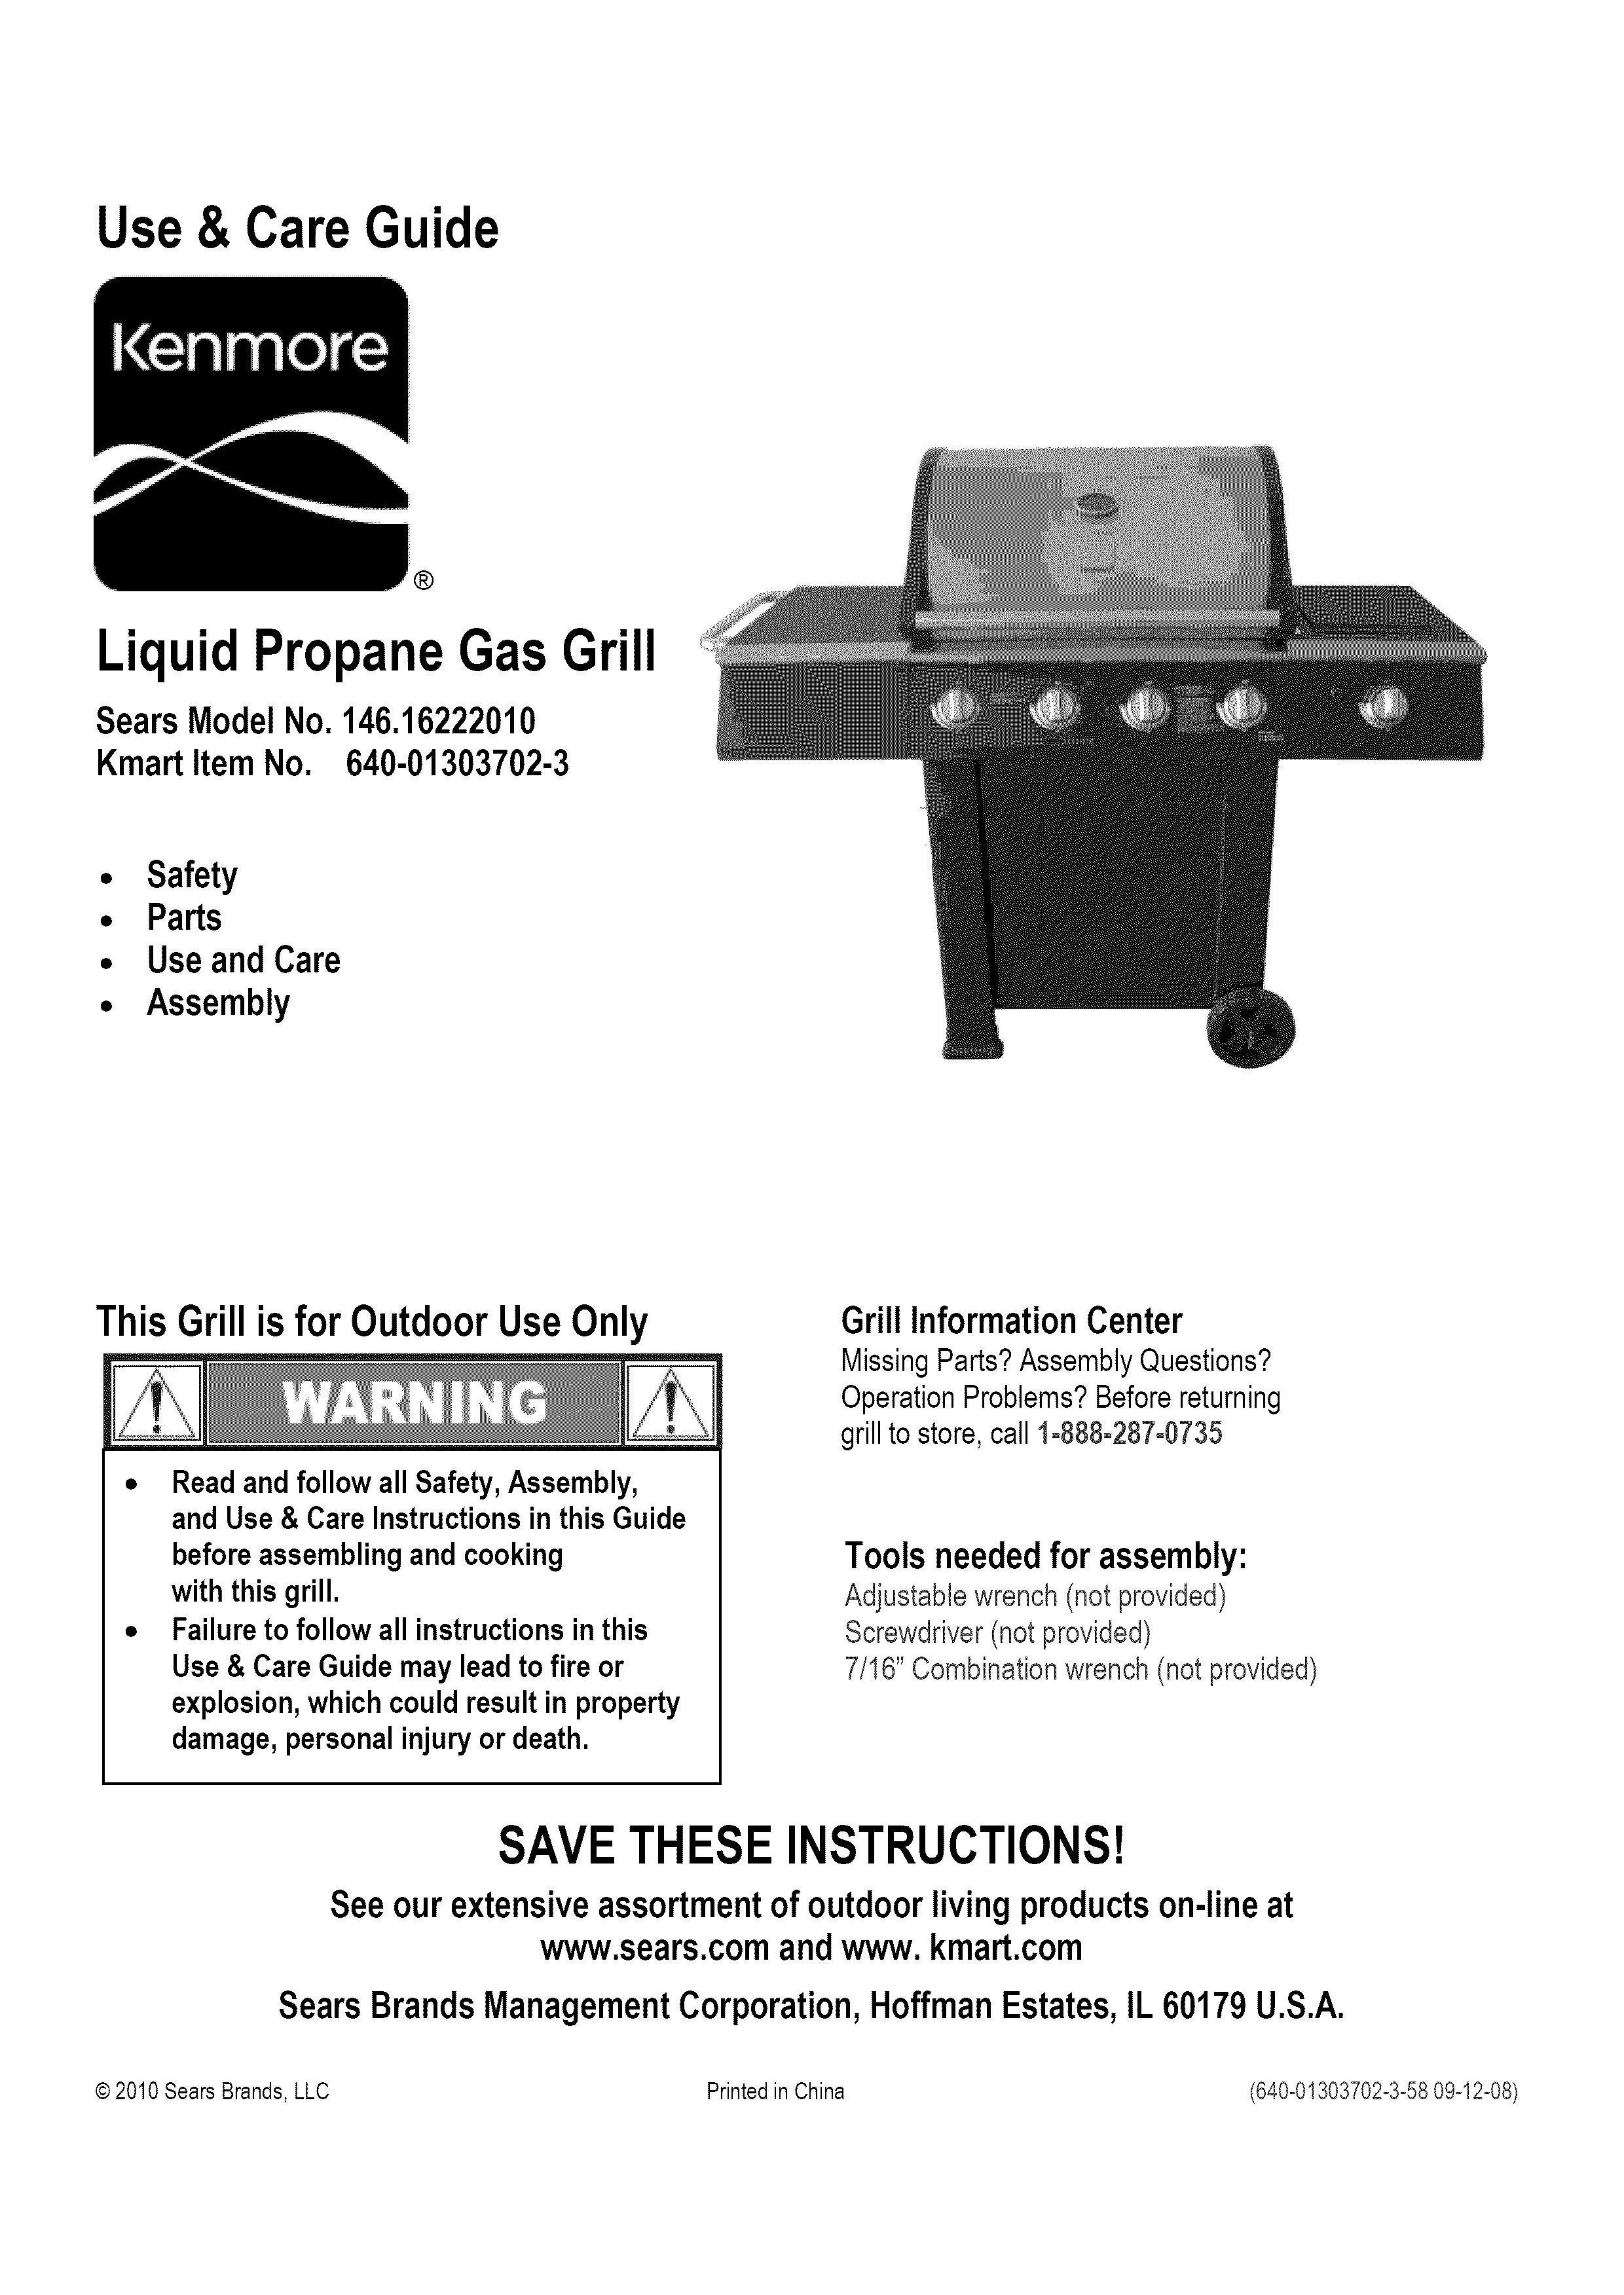 Kenmore 146.1622201 Gas Grill User Manual